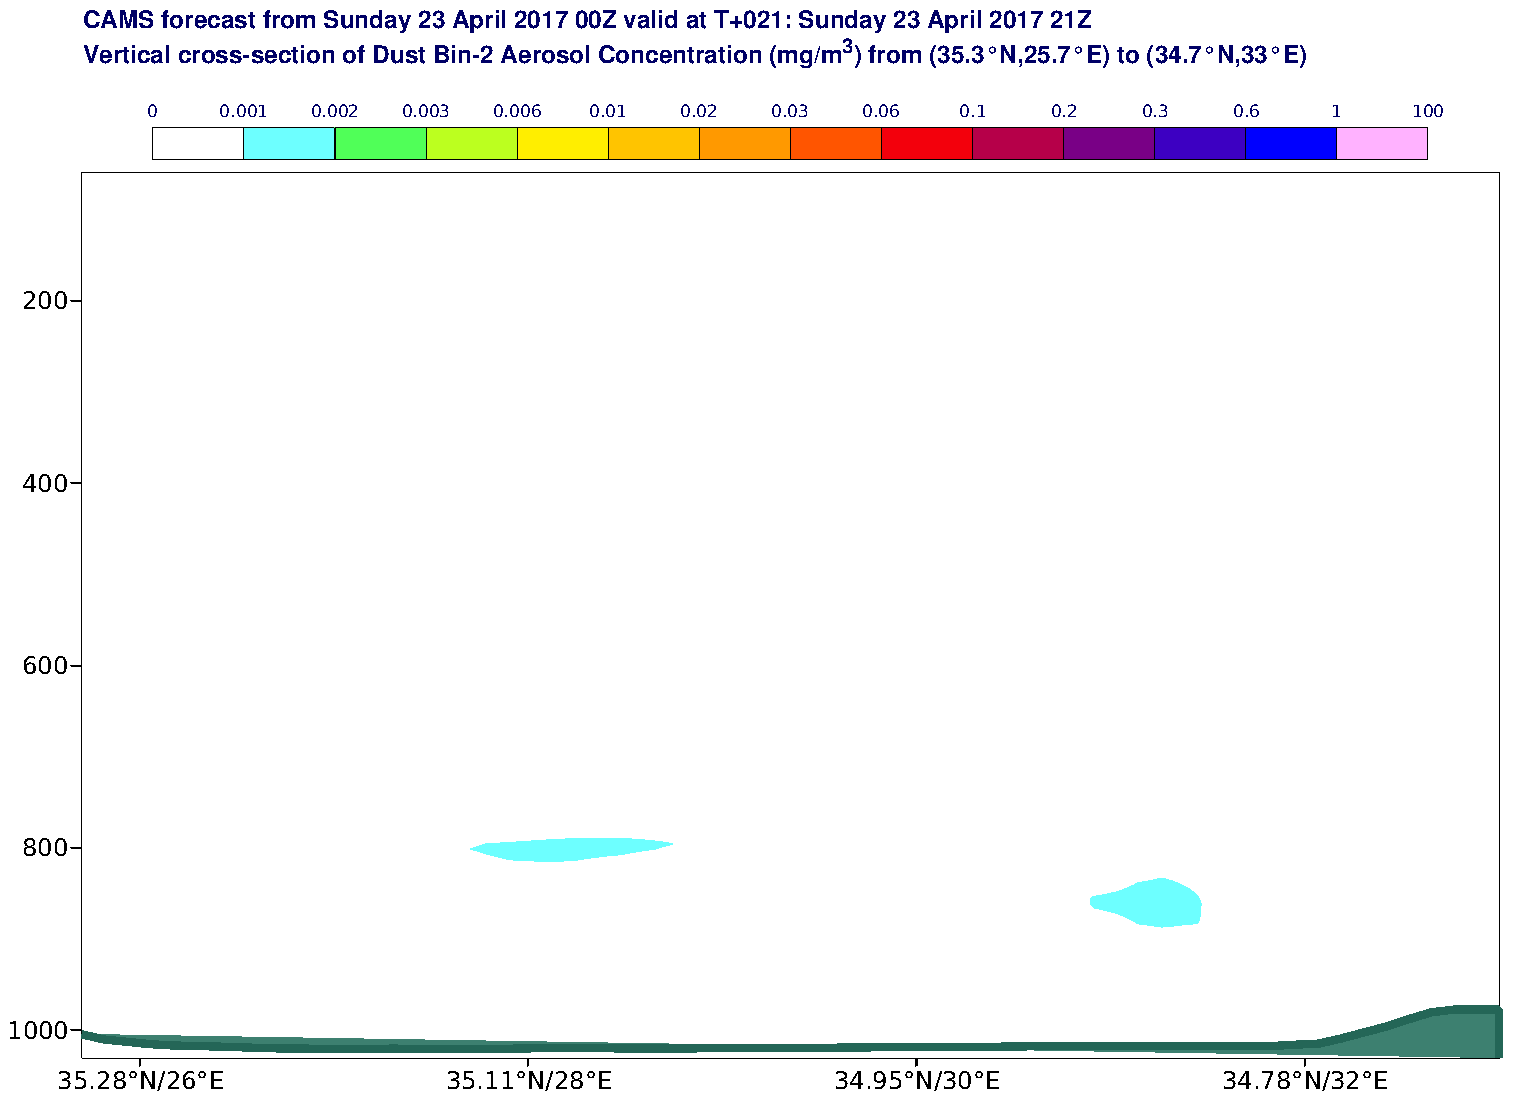 Vertical cross-section of Dust Bin-2 Aerosol Concentration (mg/m3) valid at T21 - 2017-04-23 21:00